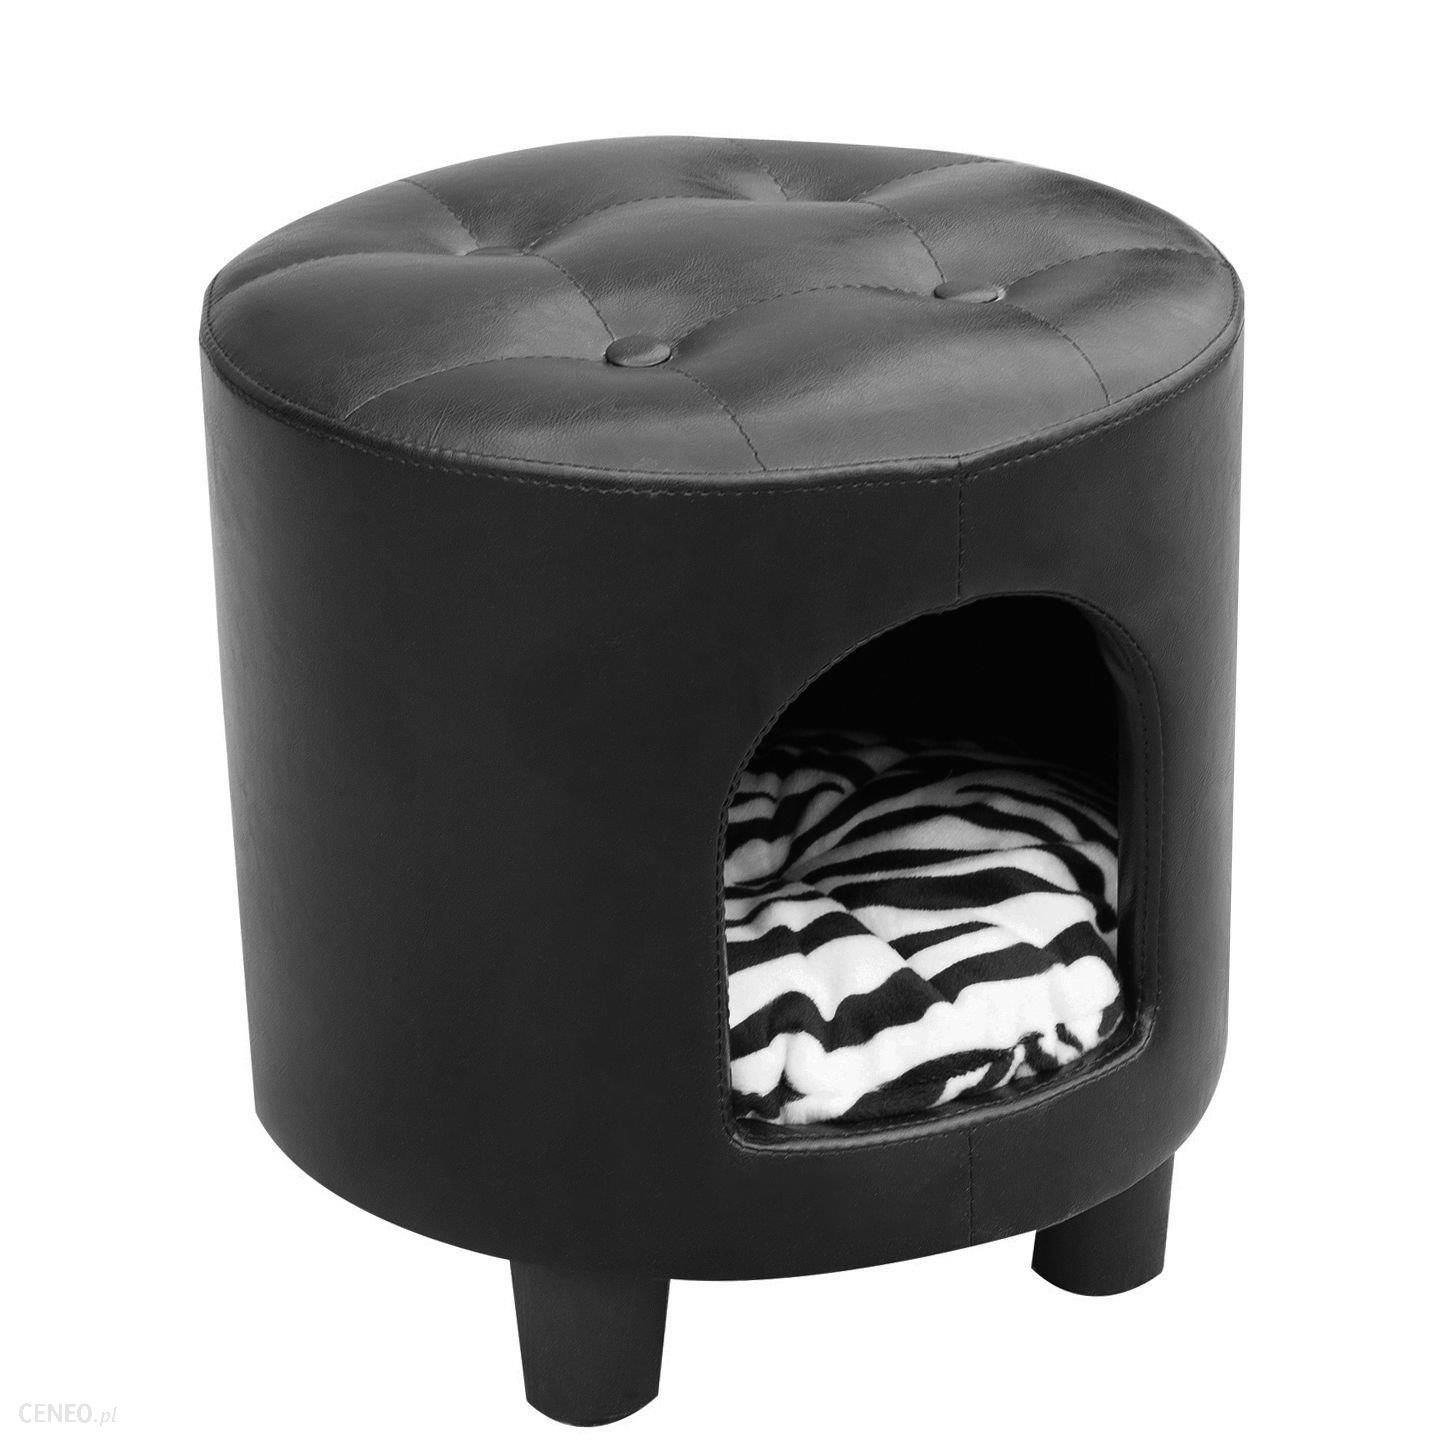 15" Contemporary Pawhut Pet Ottoman Dog House Bed Cat Home Kennel PU w/ Cushion